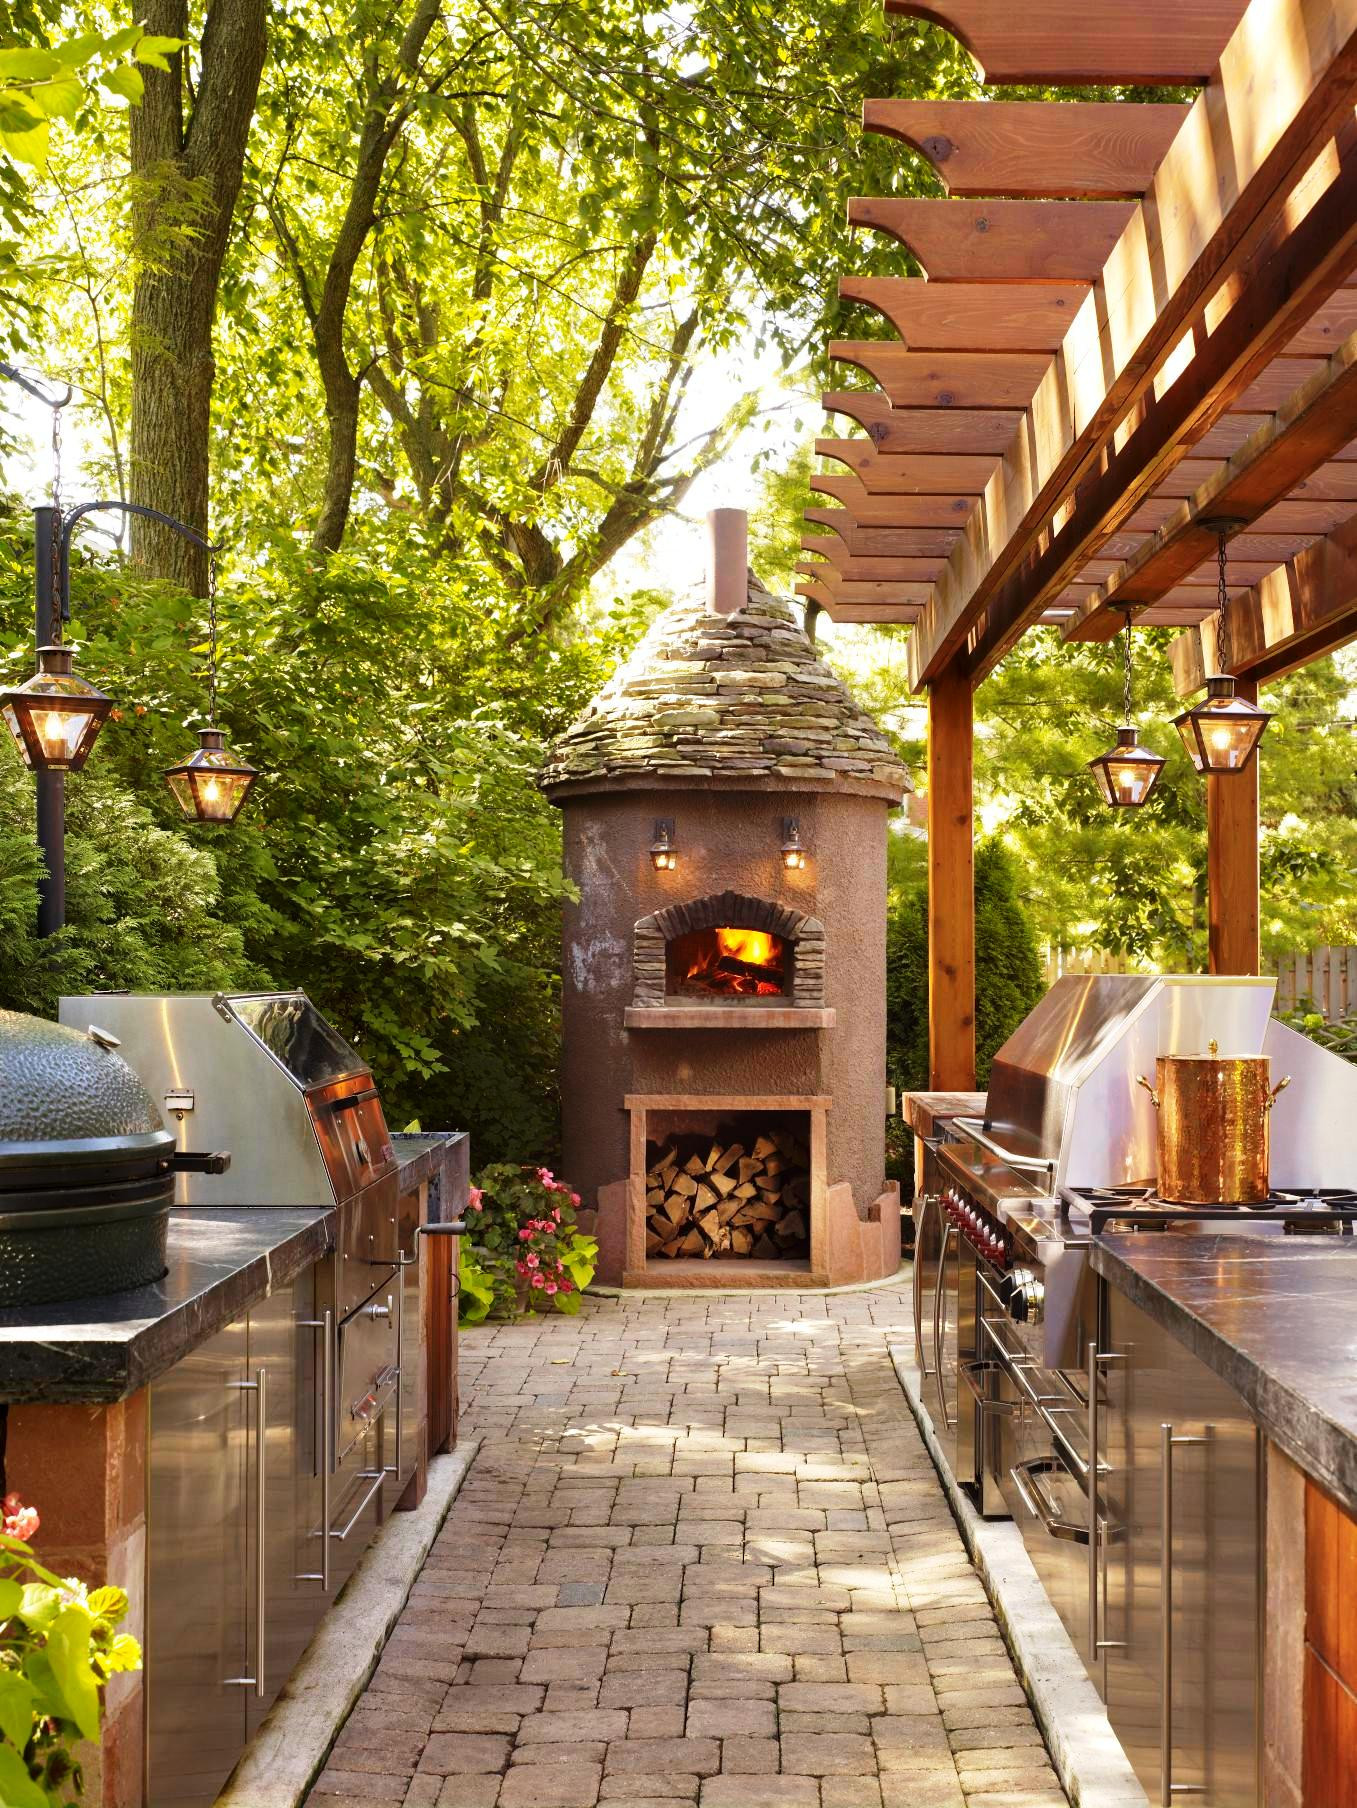 Small Outdoor Kitchen Ideas
 Outdoor Kitchen designs A Great Way To Enjoy A Beautiful Day